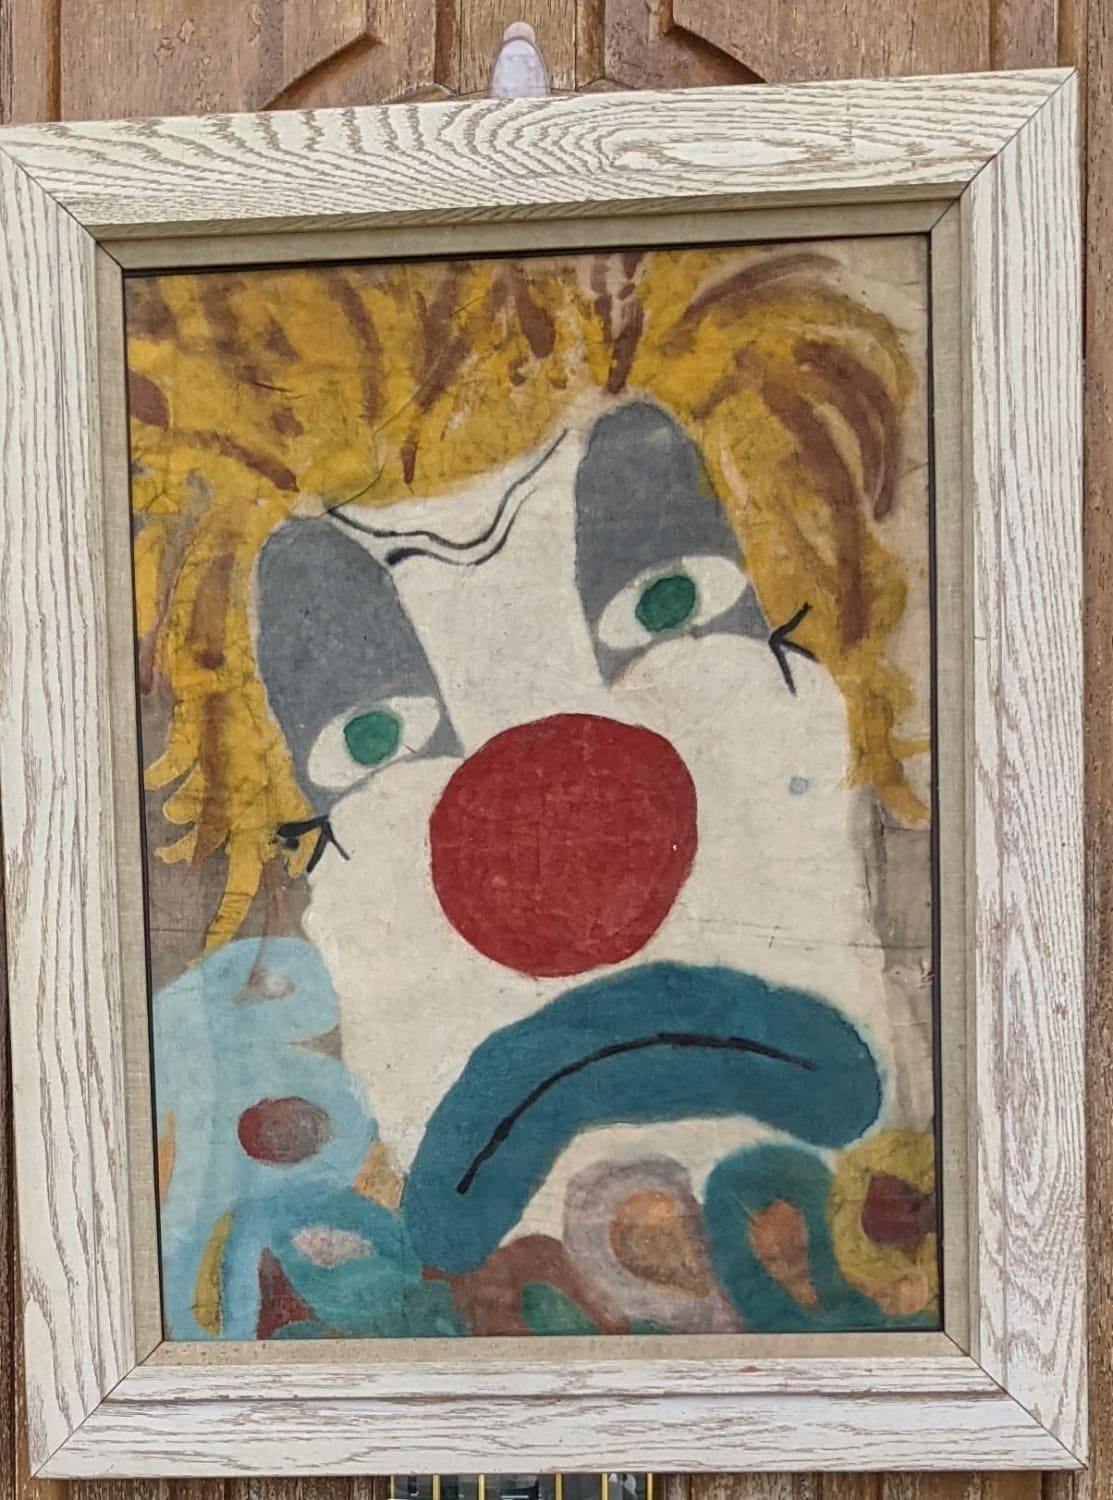 My parents hung this above my bed when I was a child and wondered why I had nightmares.